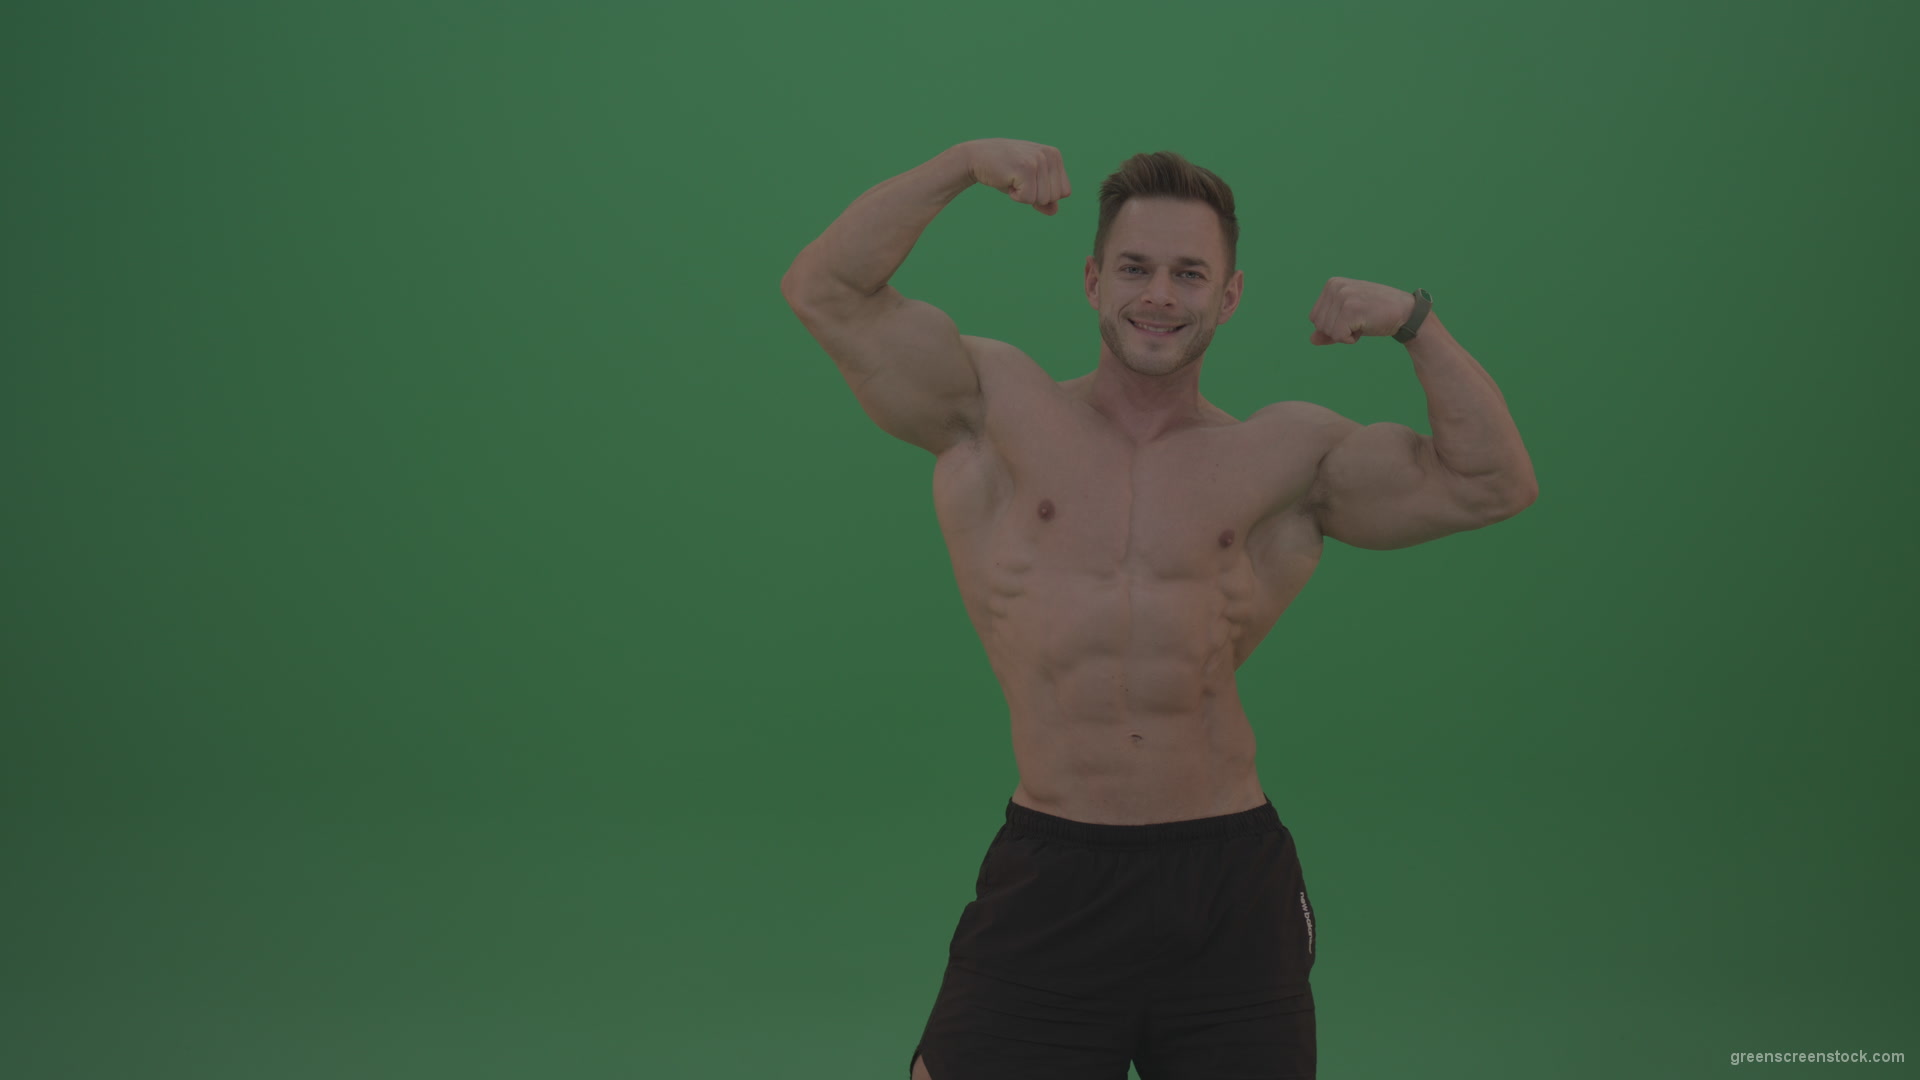 Green-Screen-Blone_Bodybuilder_Demonstrating_Front_Double_Biceps_And_Lateral_Spread_Positions_On_Green_Screen_Wall_Background_005 Green Screen Stock